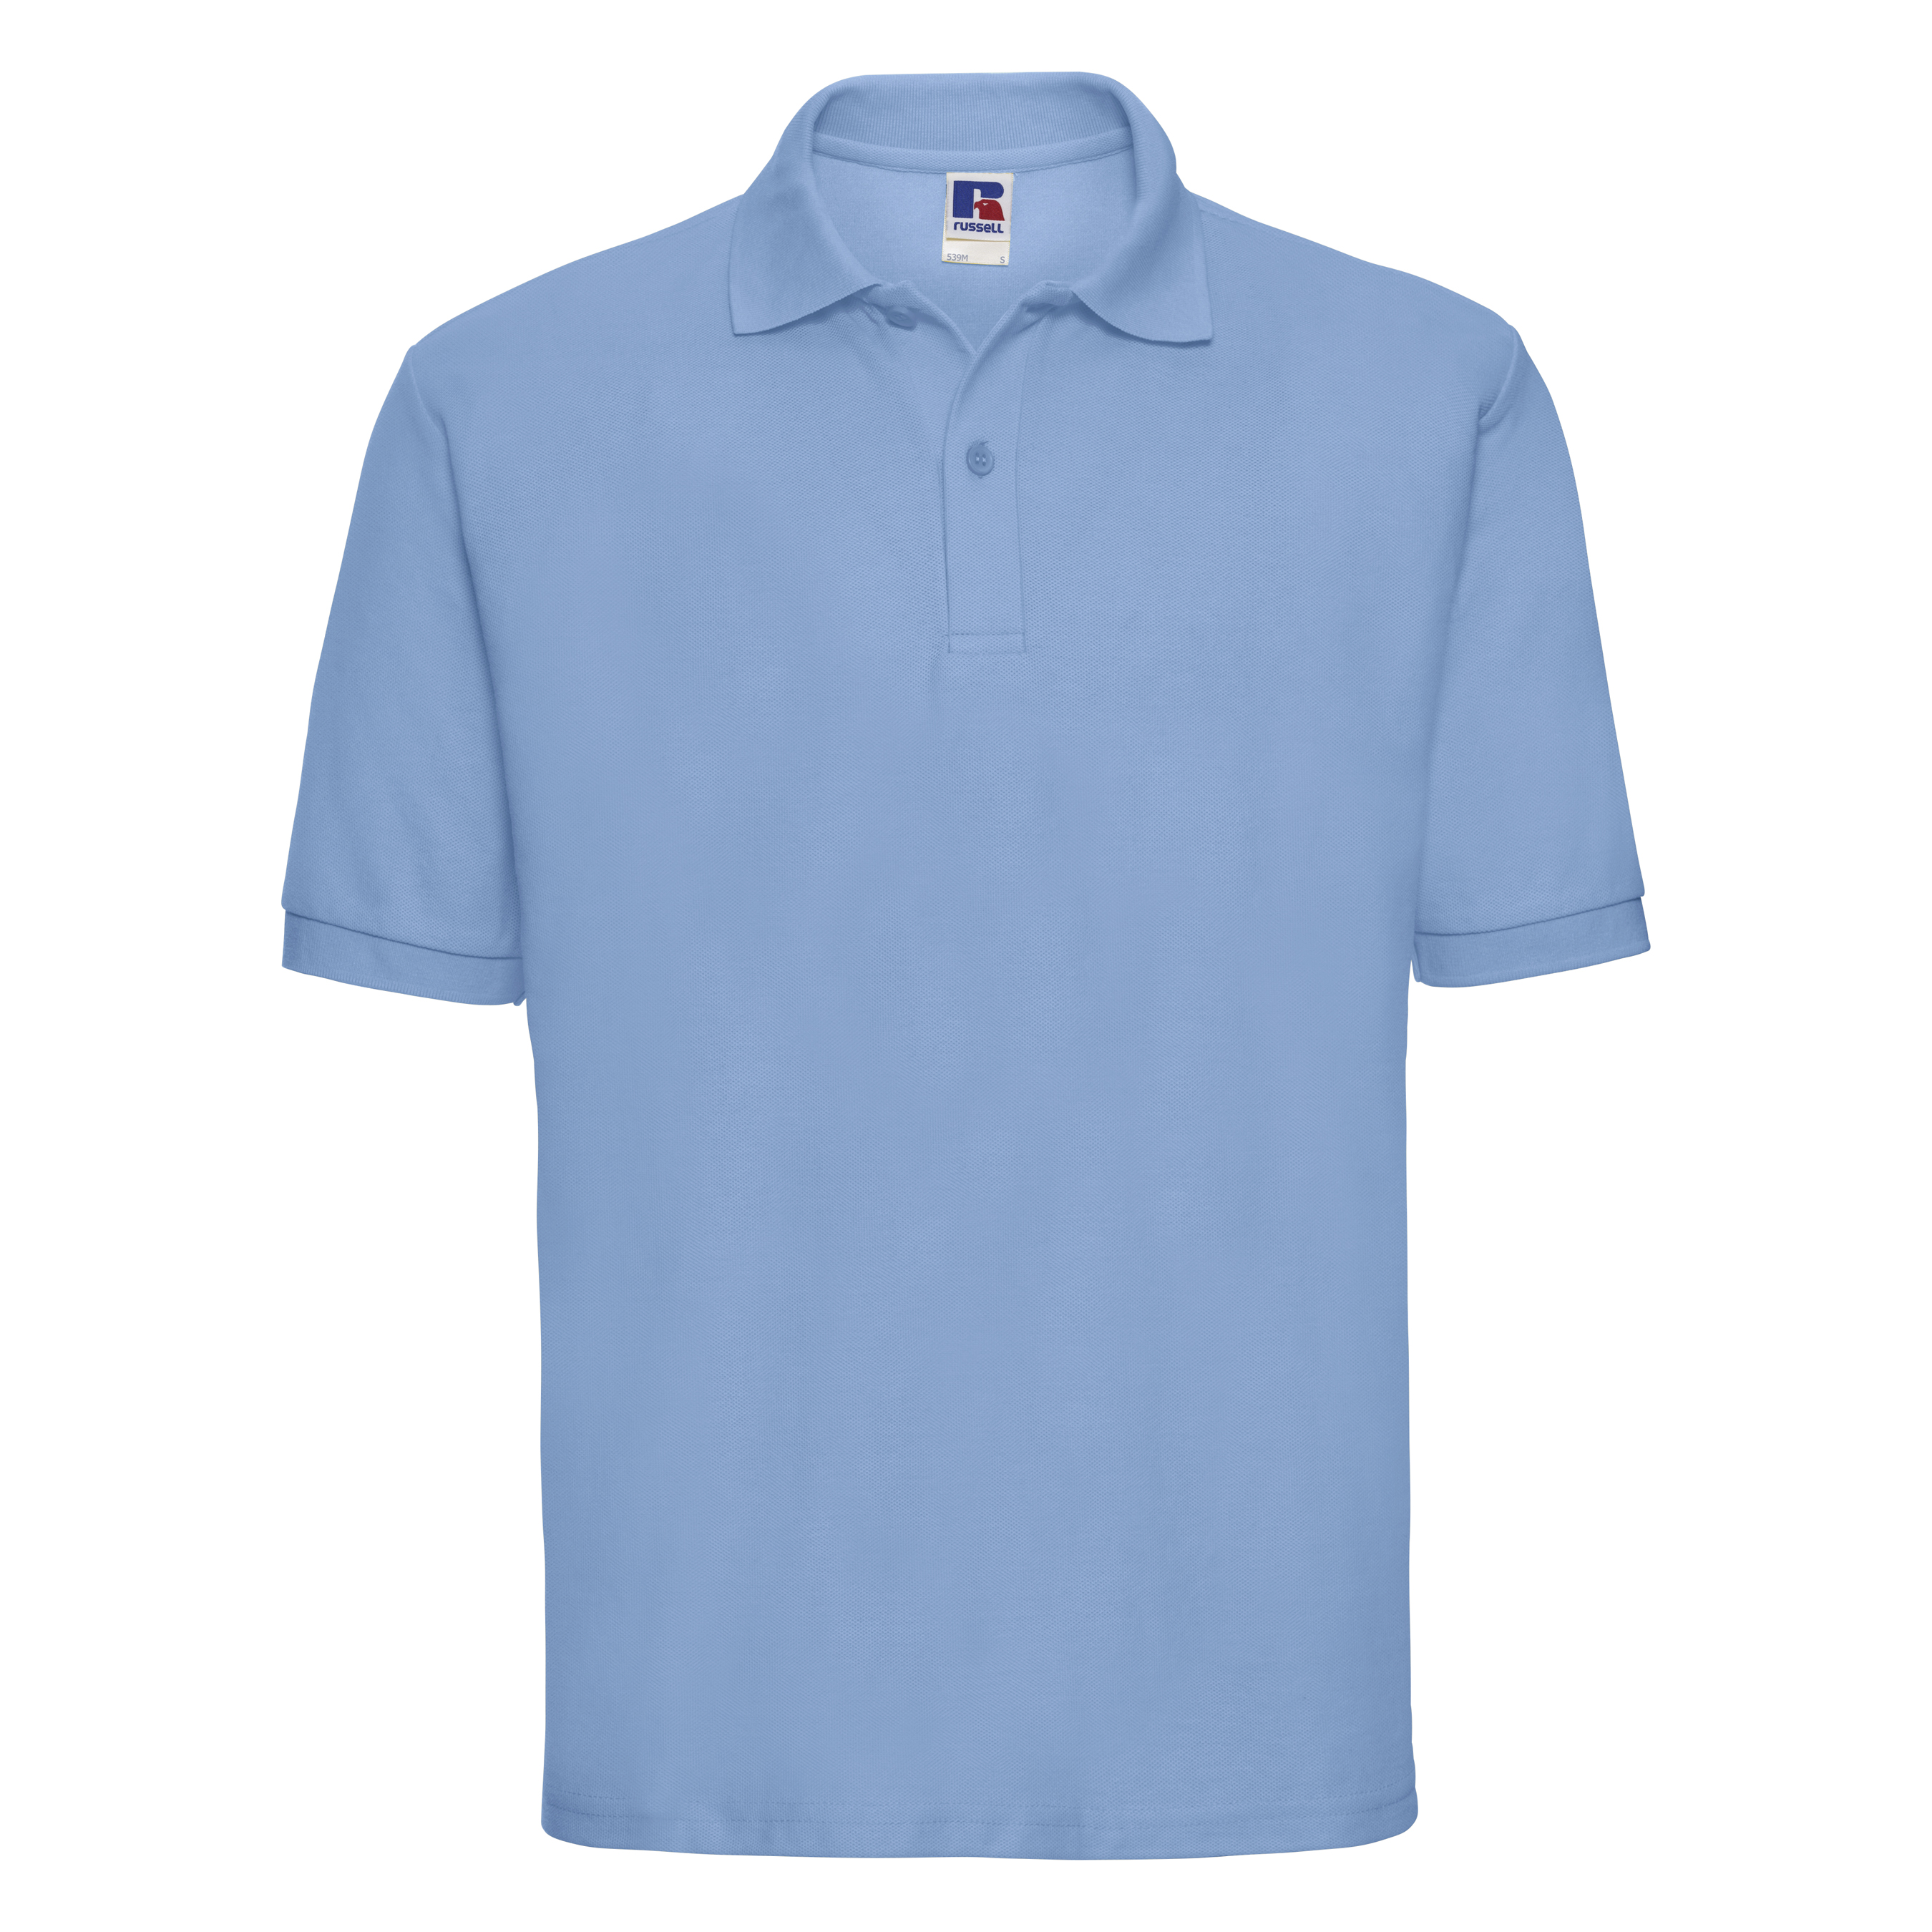 ax-httpswebsystems.s3.amazonaws.comtmp_for_downloadrussell-classic-polycotton-polo-sky.jpg